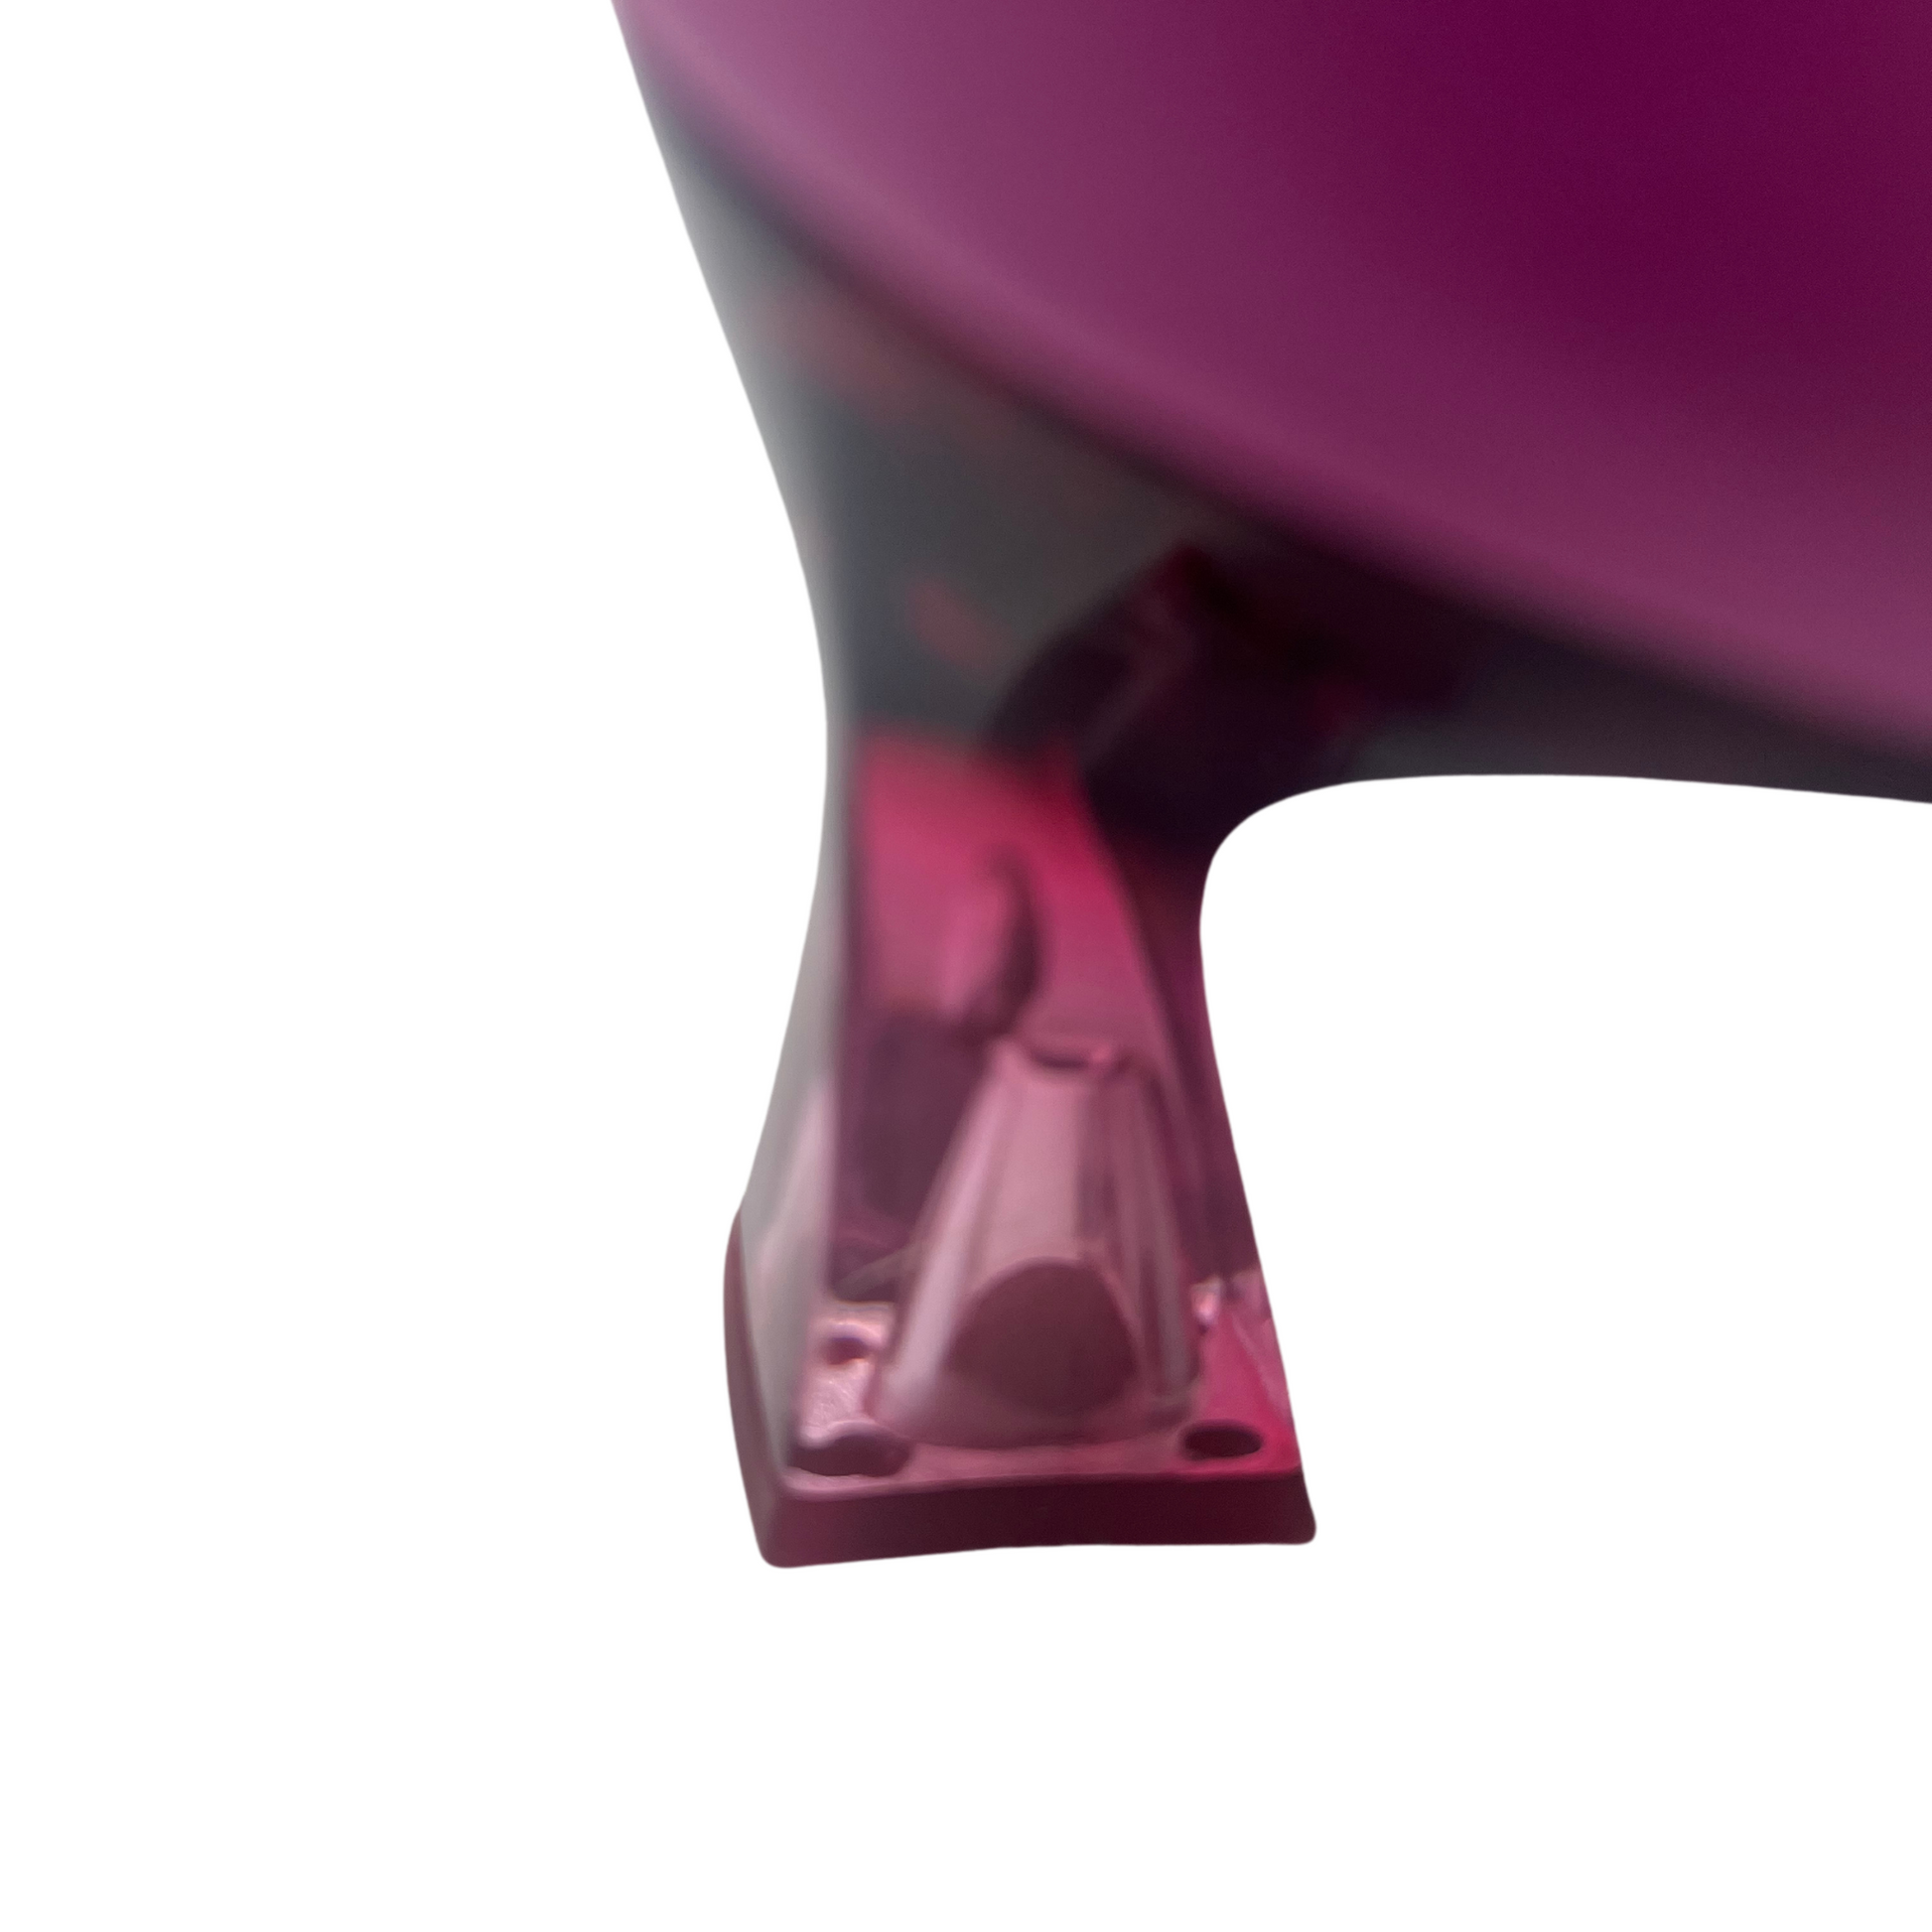 View of the flared lucite pink heel on a pump shoe